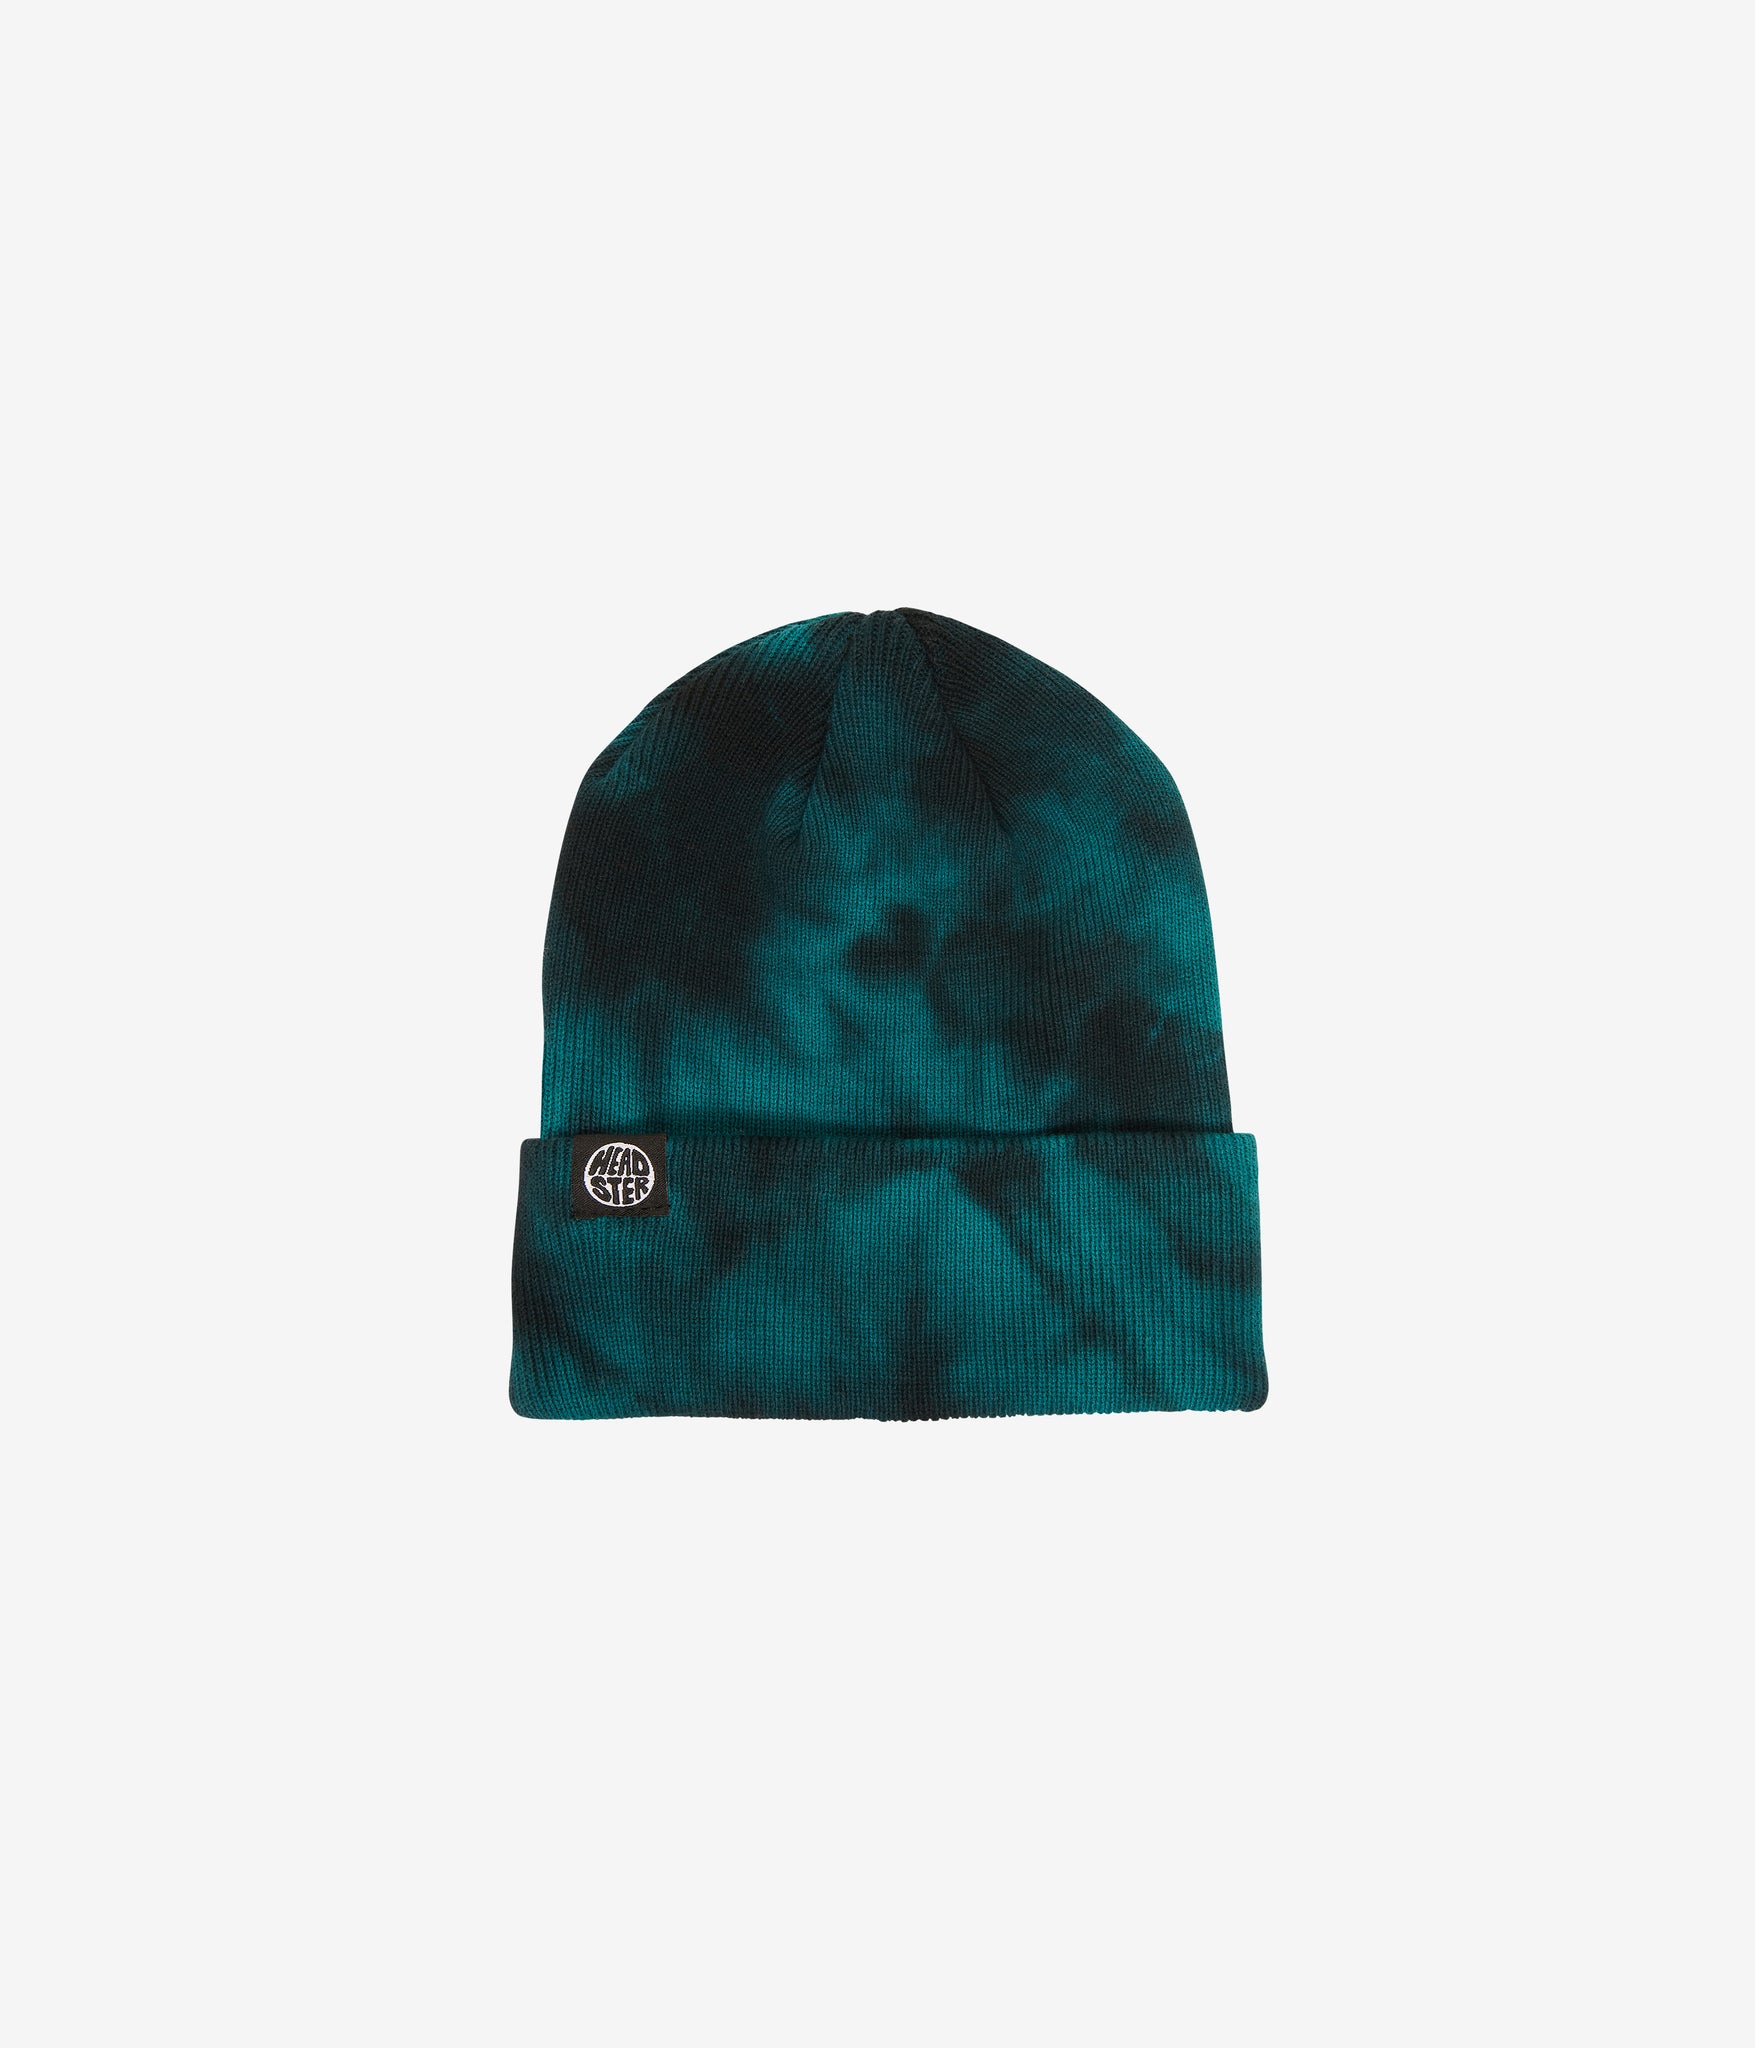 HEADSTER Steal Beanie hats | Tie Kids for Babies KIDS - and Teal Dye